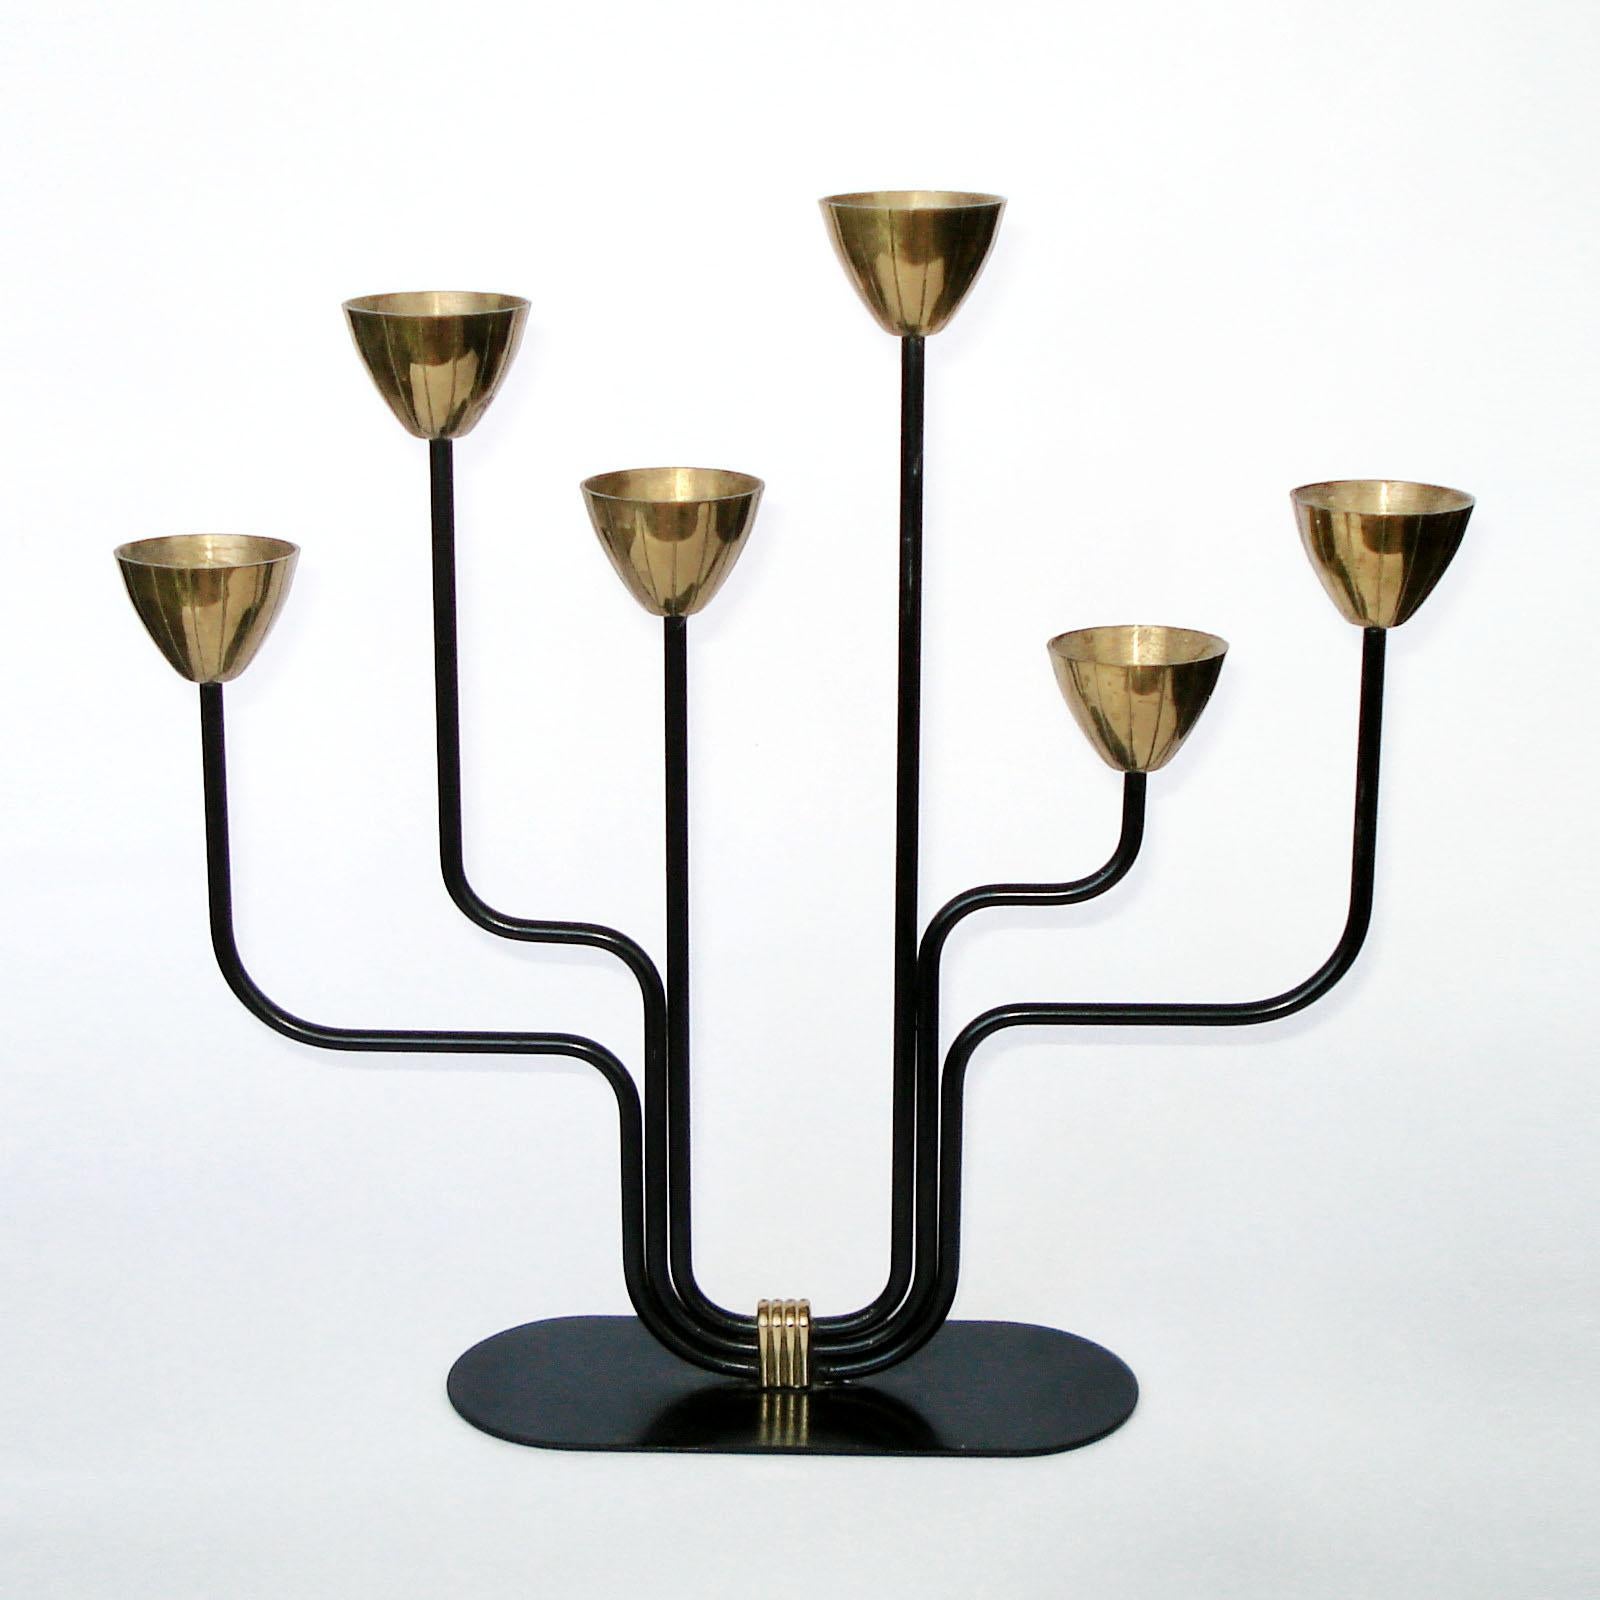 Candleholder by Gunnar Ander for Ystad Metall, Sweden In Good Condition For Sale In Bochum, NRW